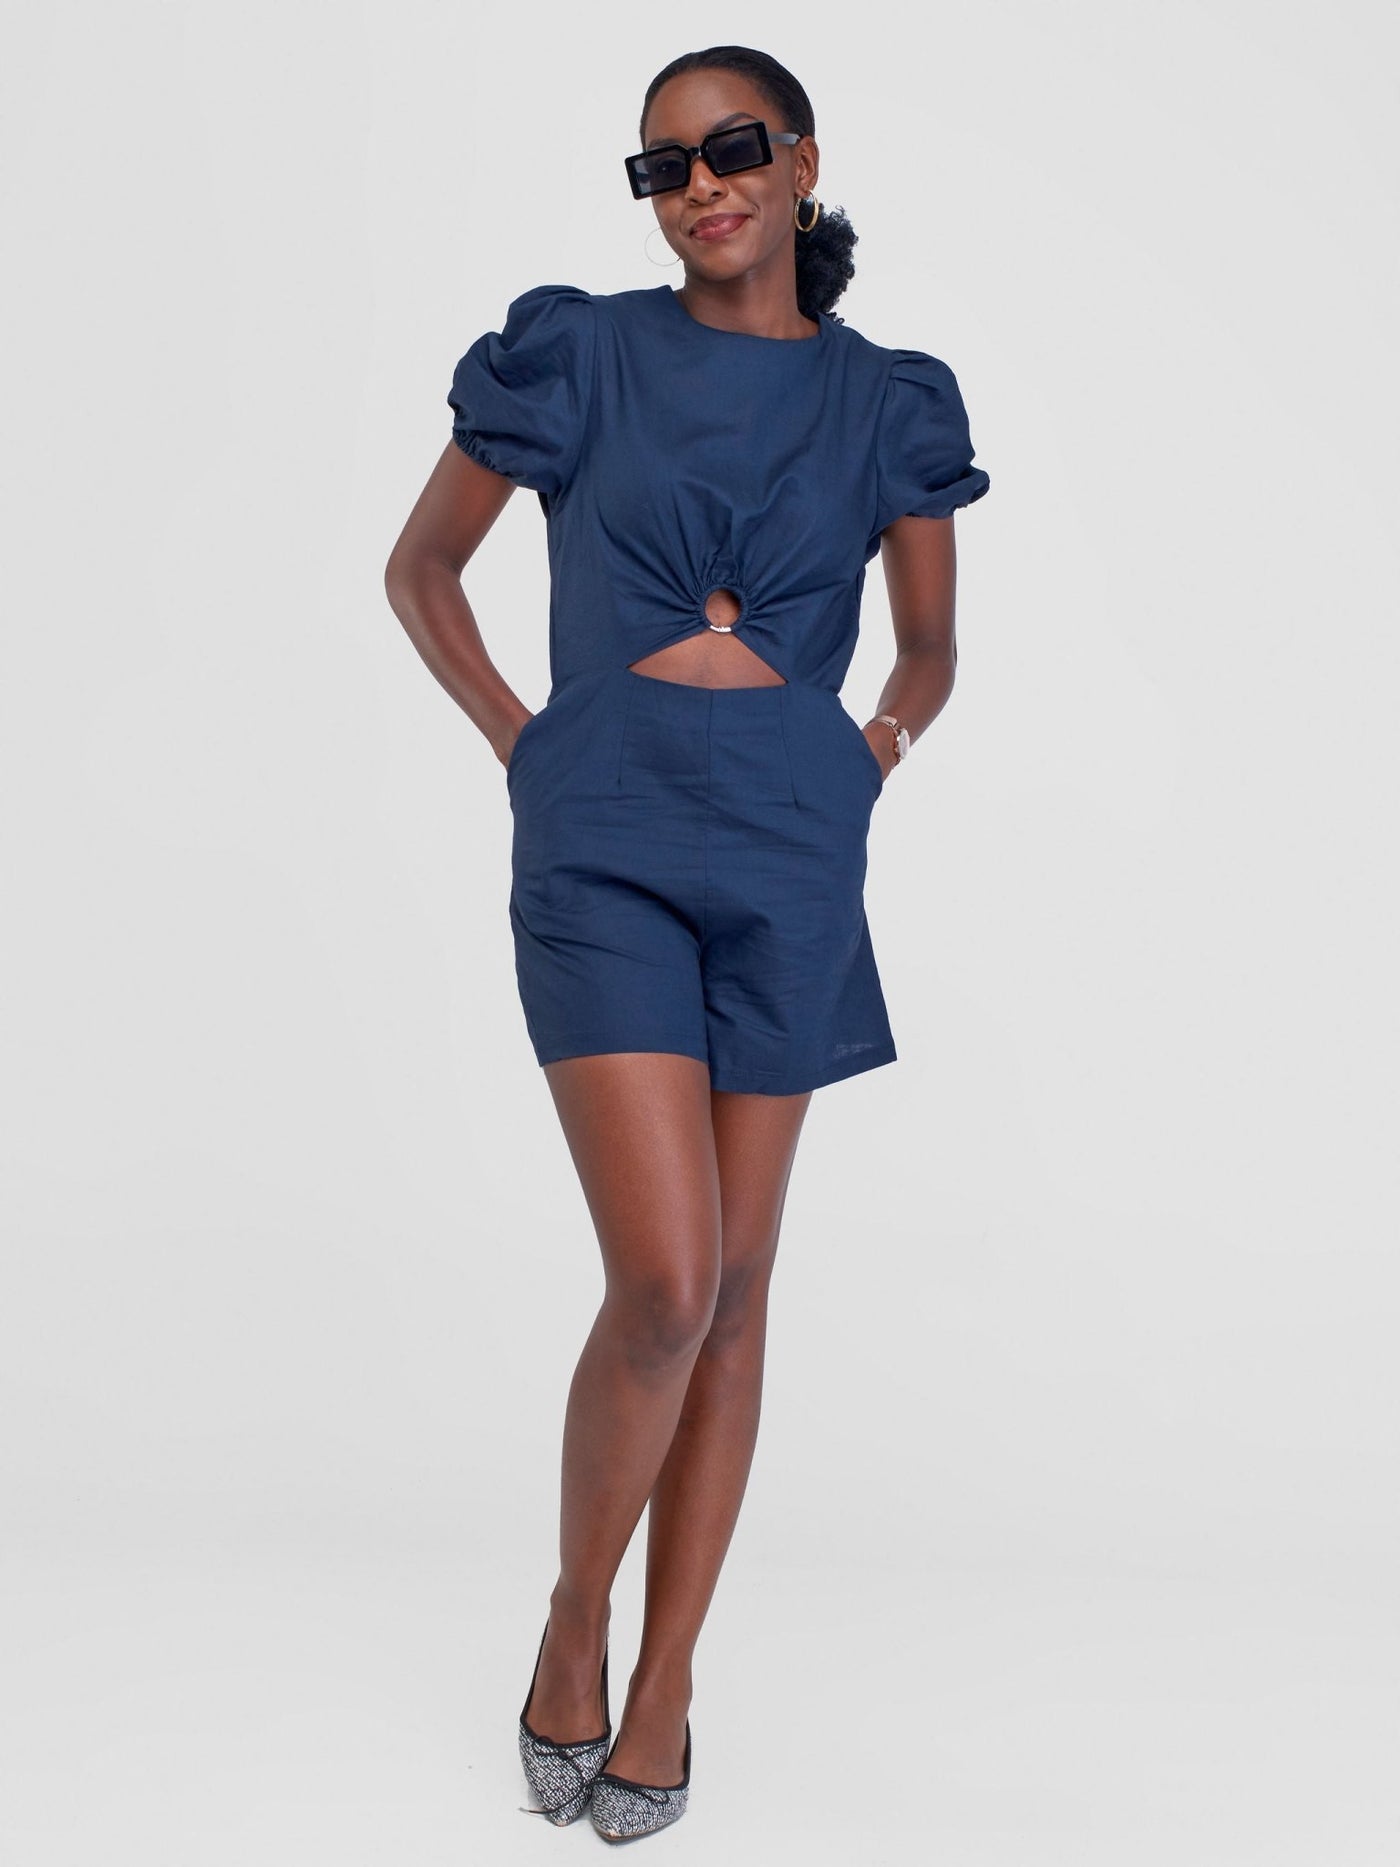 Alara Linen Romper With A Central Metalic Ring And Front Cutout - Navy Blue - Shopzetu